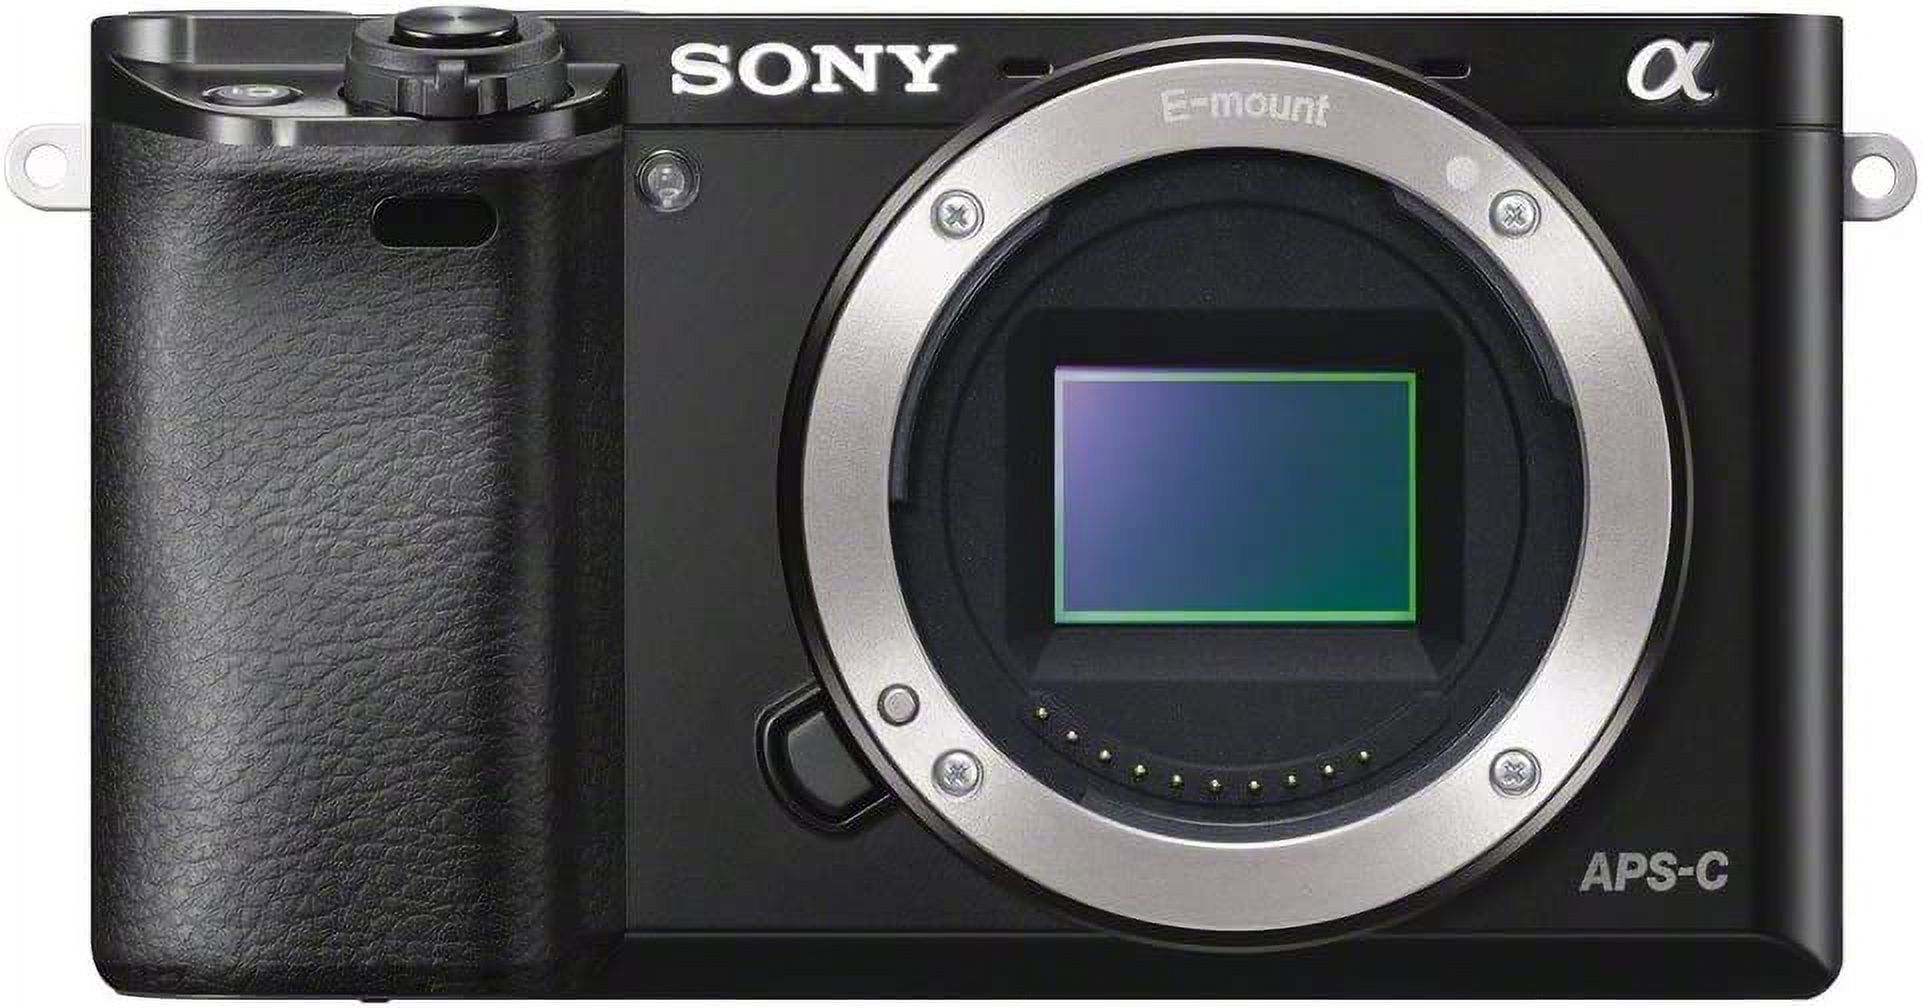 Sony Alpha a6000 Mirrorless Interchangeable-lens Camera - Black - image 1 of 2